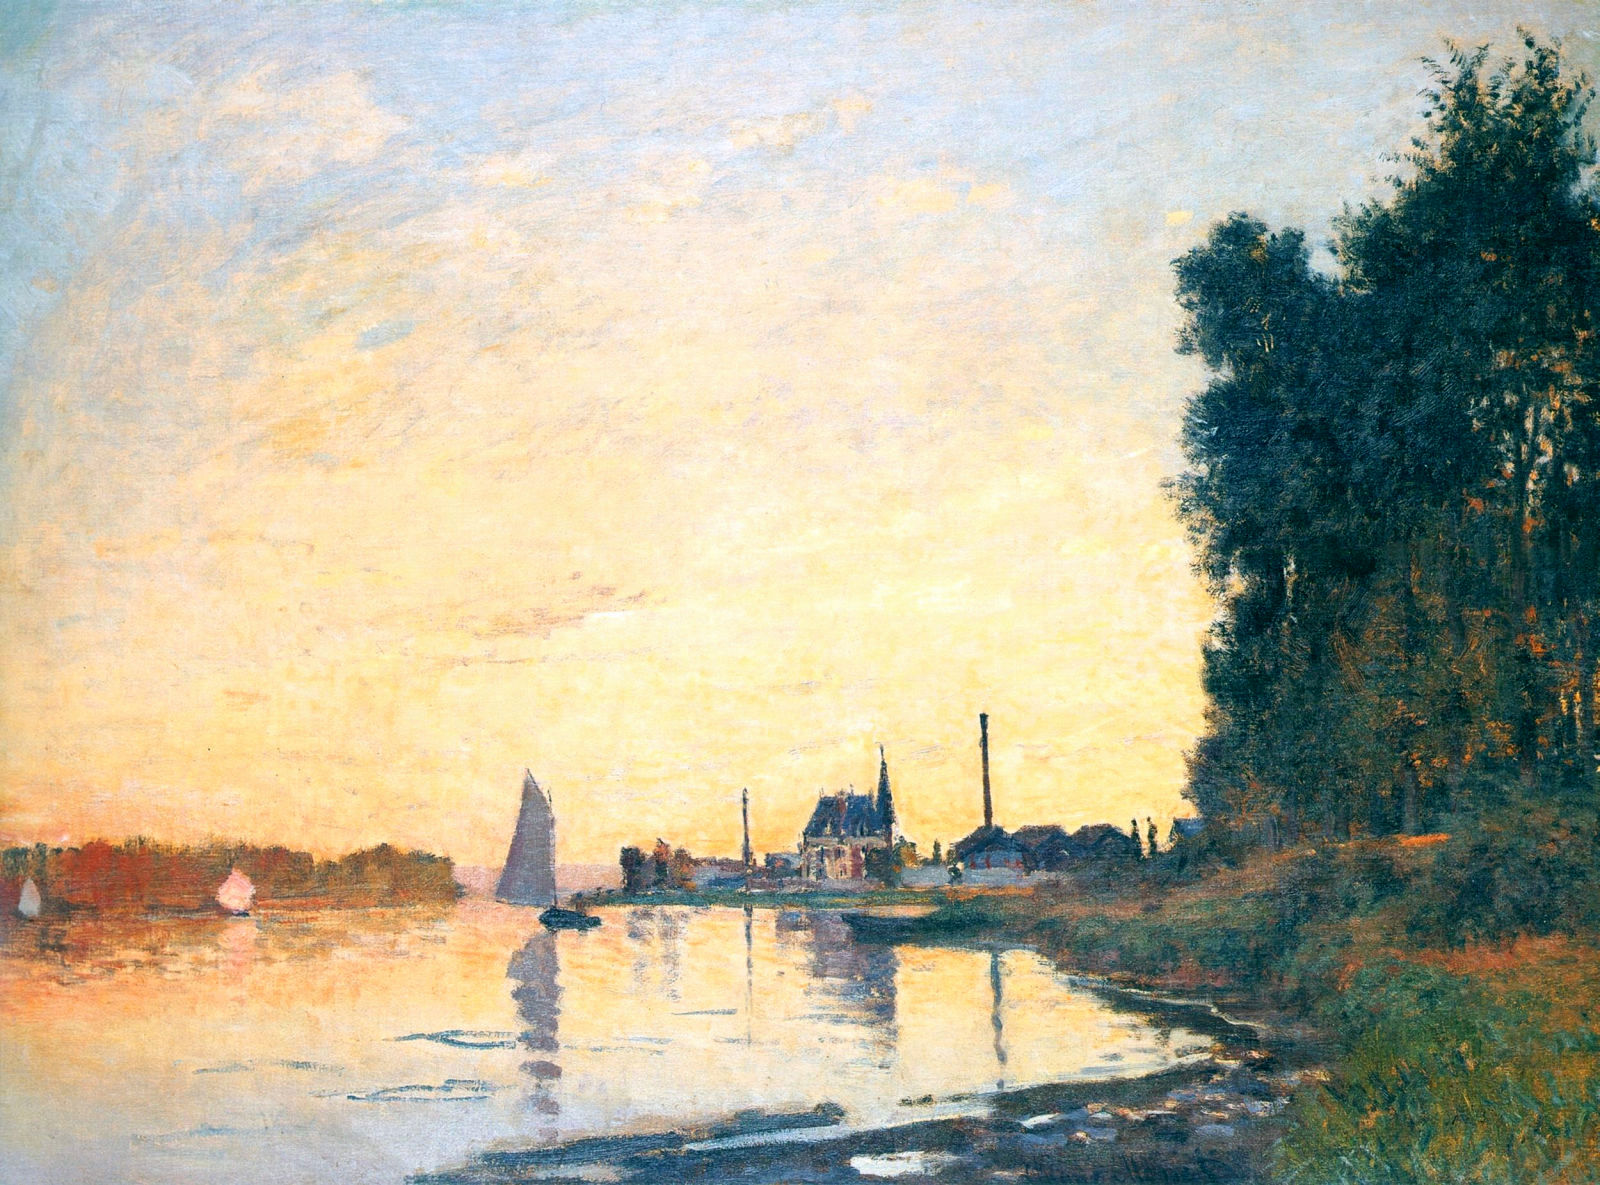 Argenteuil, Late Afternoon 1872